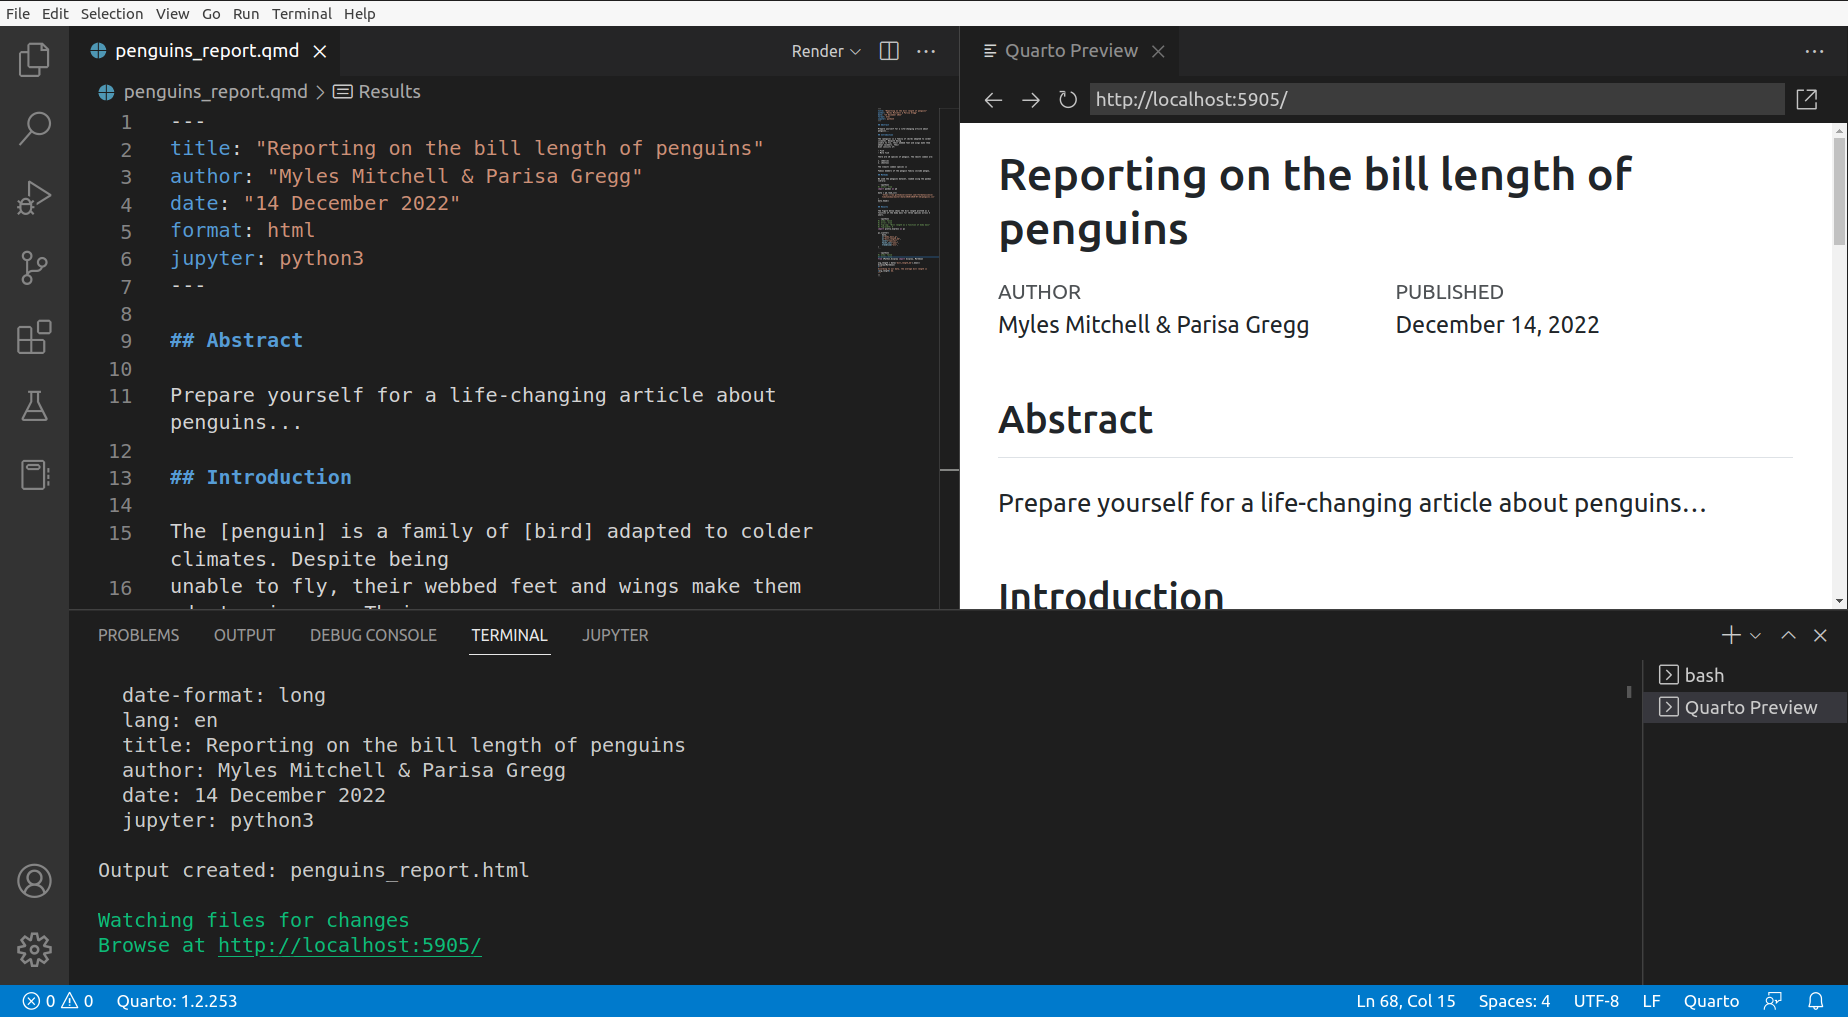 A screenshot of VS Code: The qmd file contents are displayed on the left, and the rendered document preview is displayed in a side window on the right.